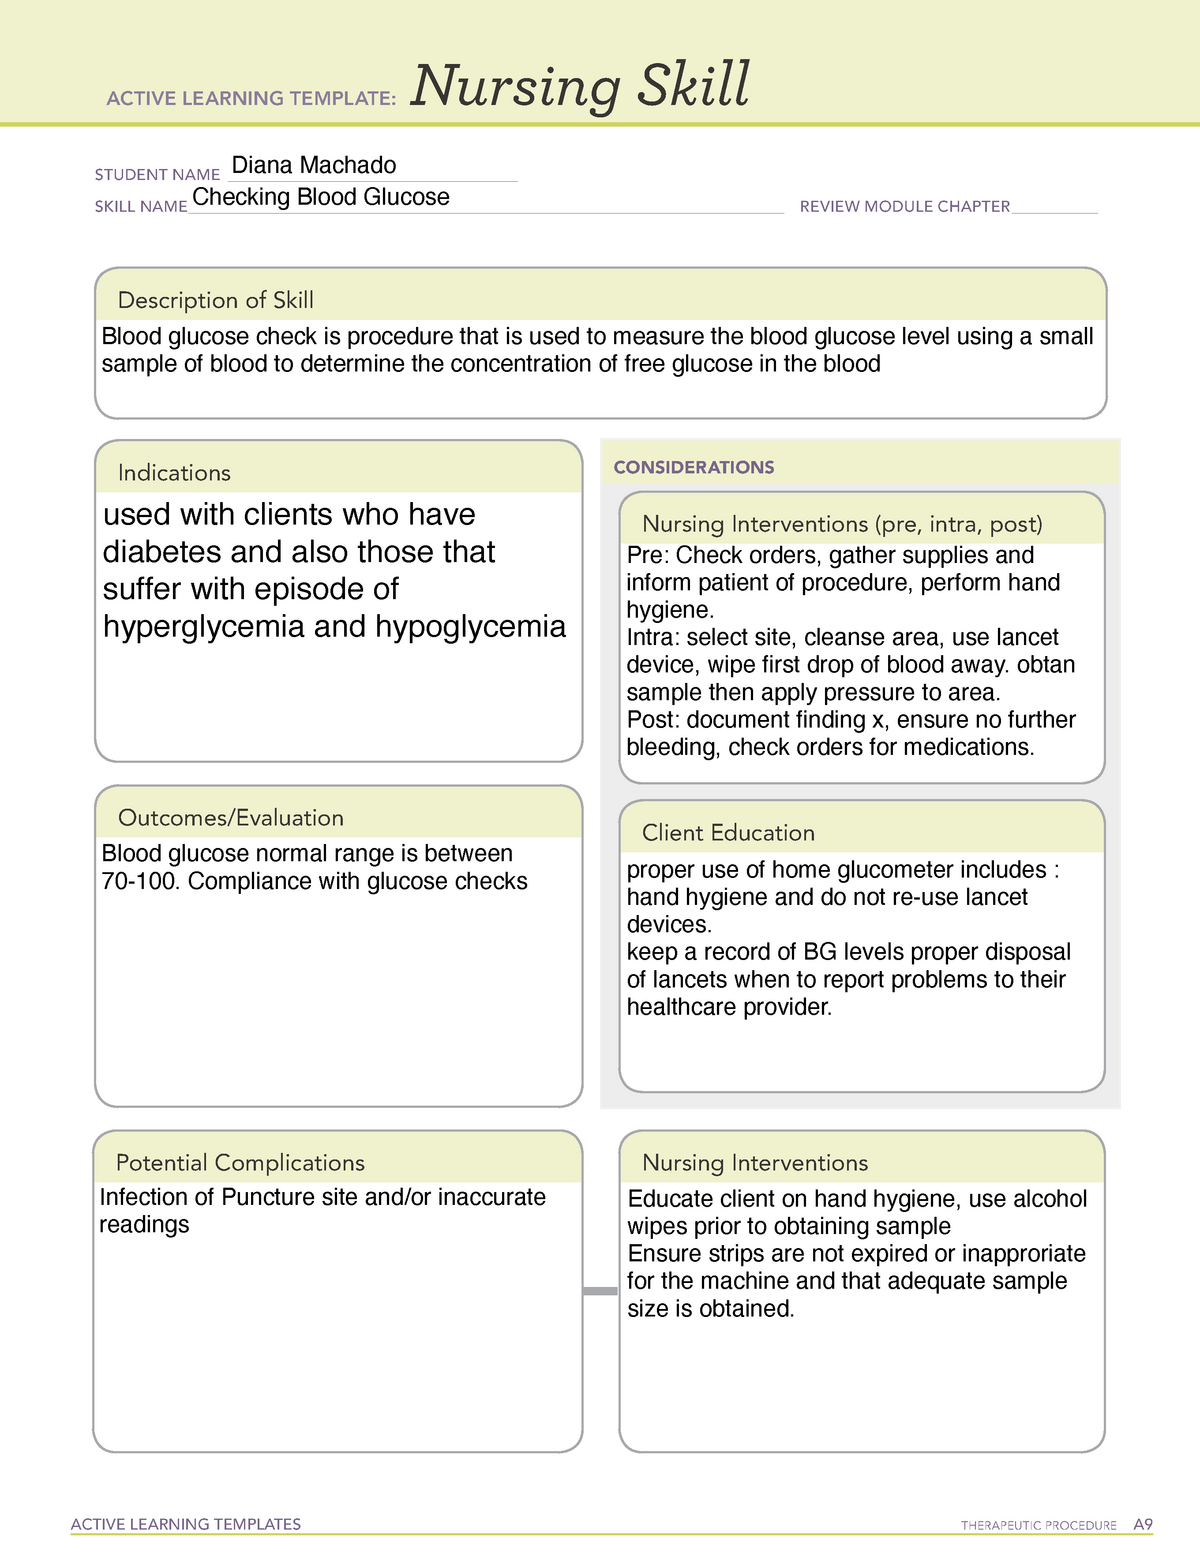 diabetes-wk-1-active-learning-template-active-learning-templates-therapeutic-procedure-a